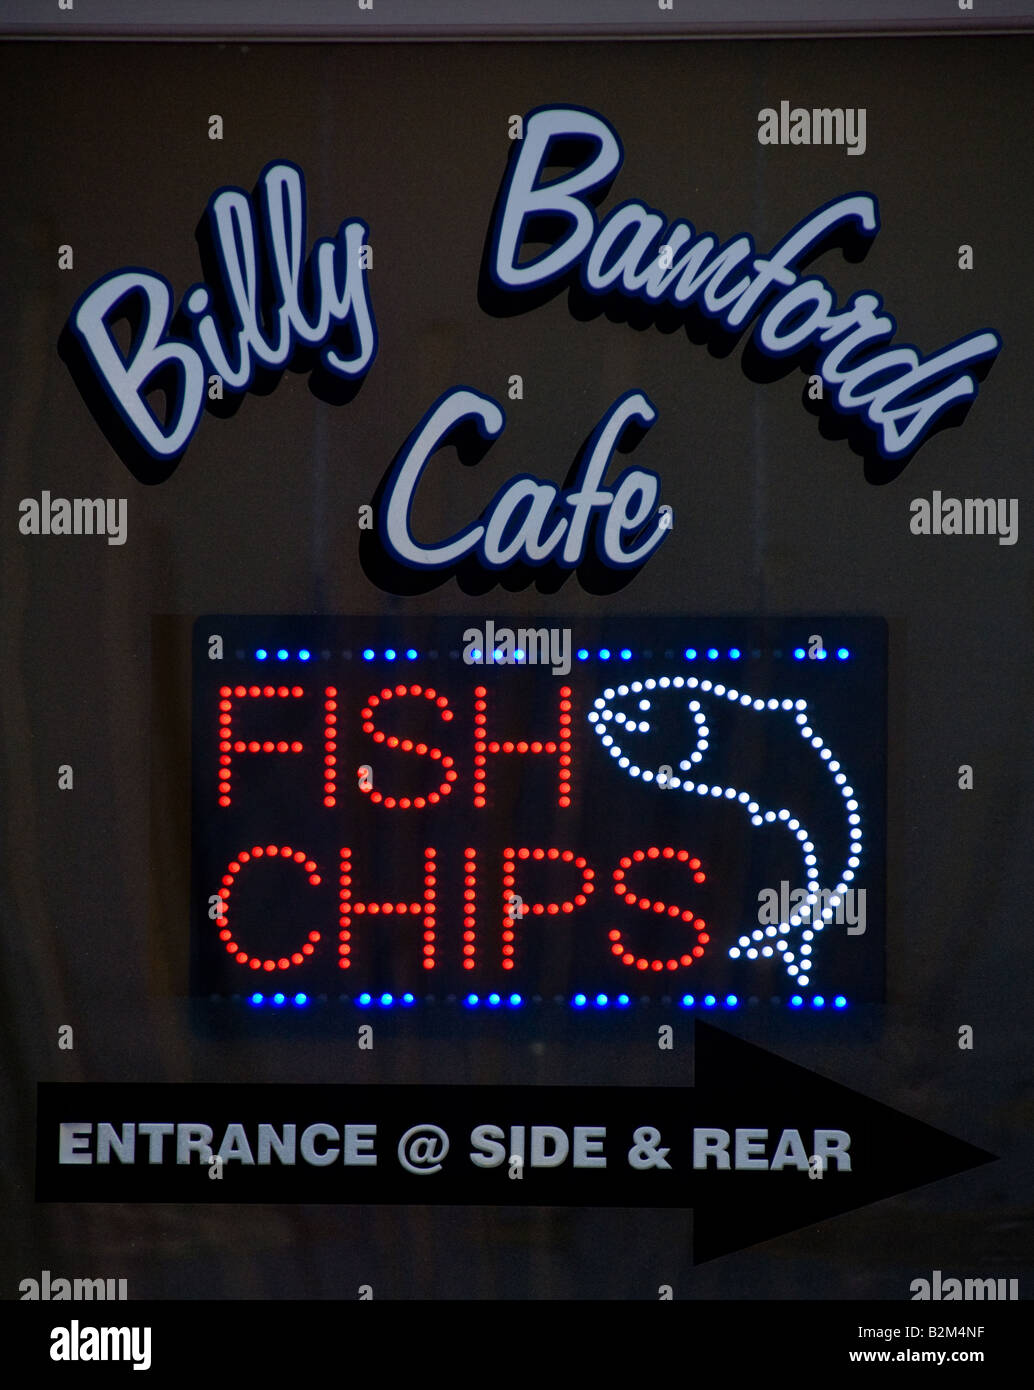 Billy Bamfords Cafe fish and chip sign in window Stock Photo